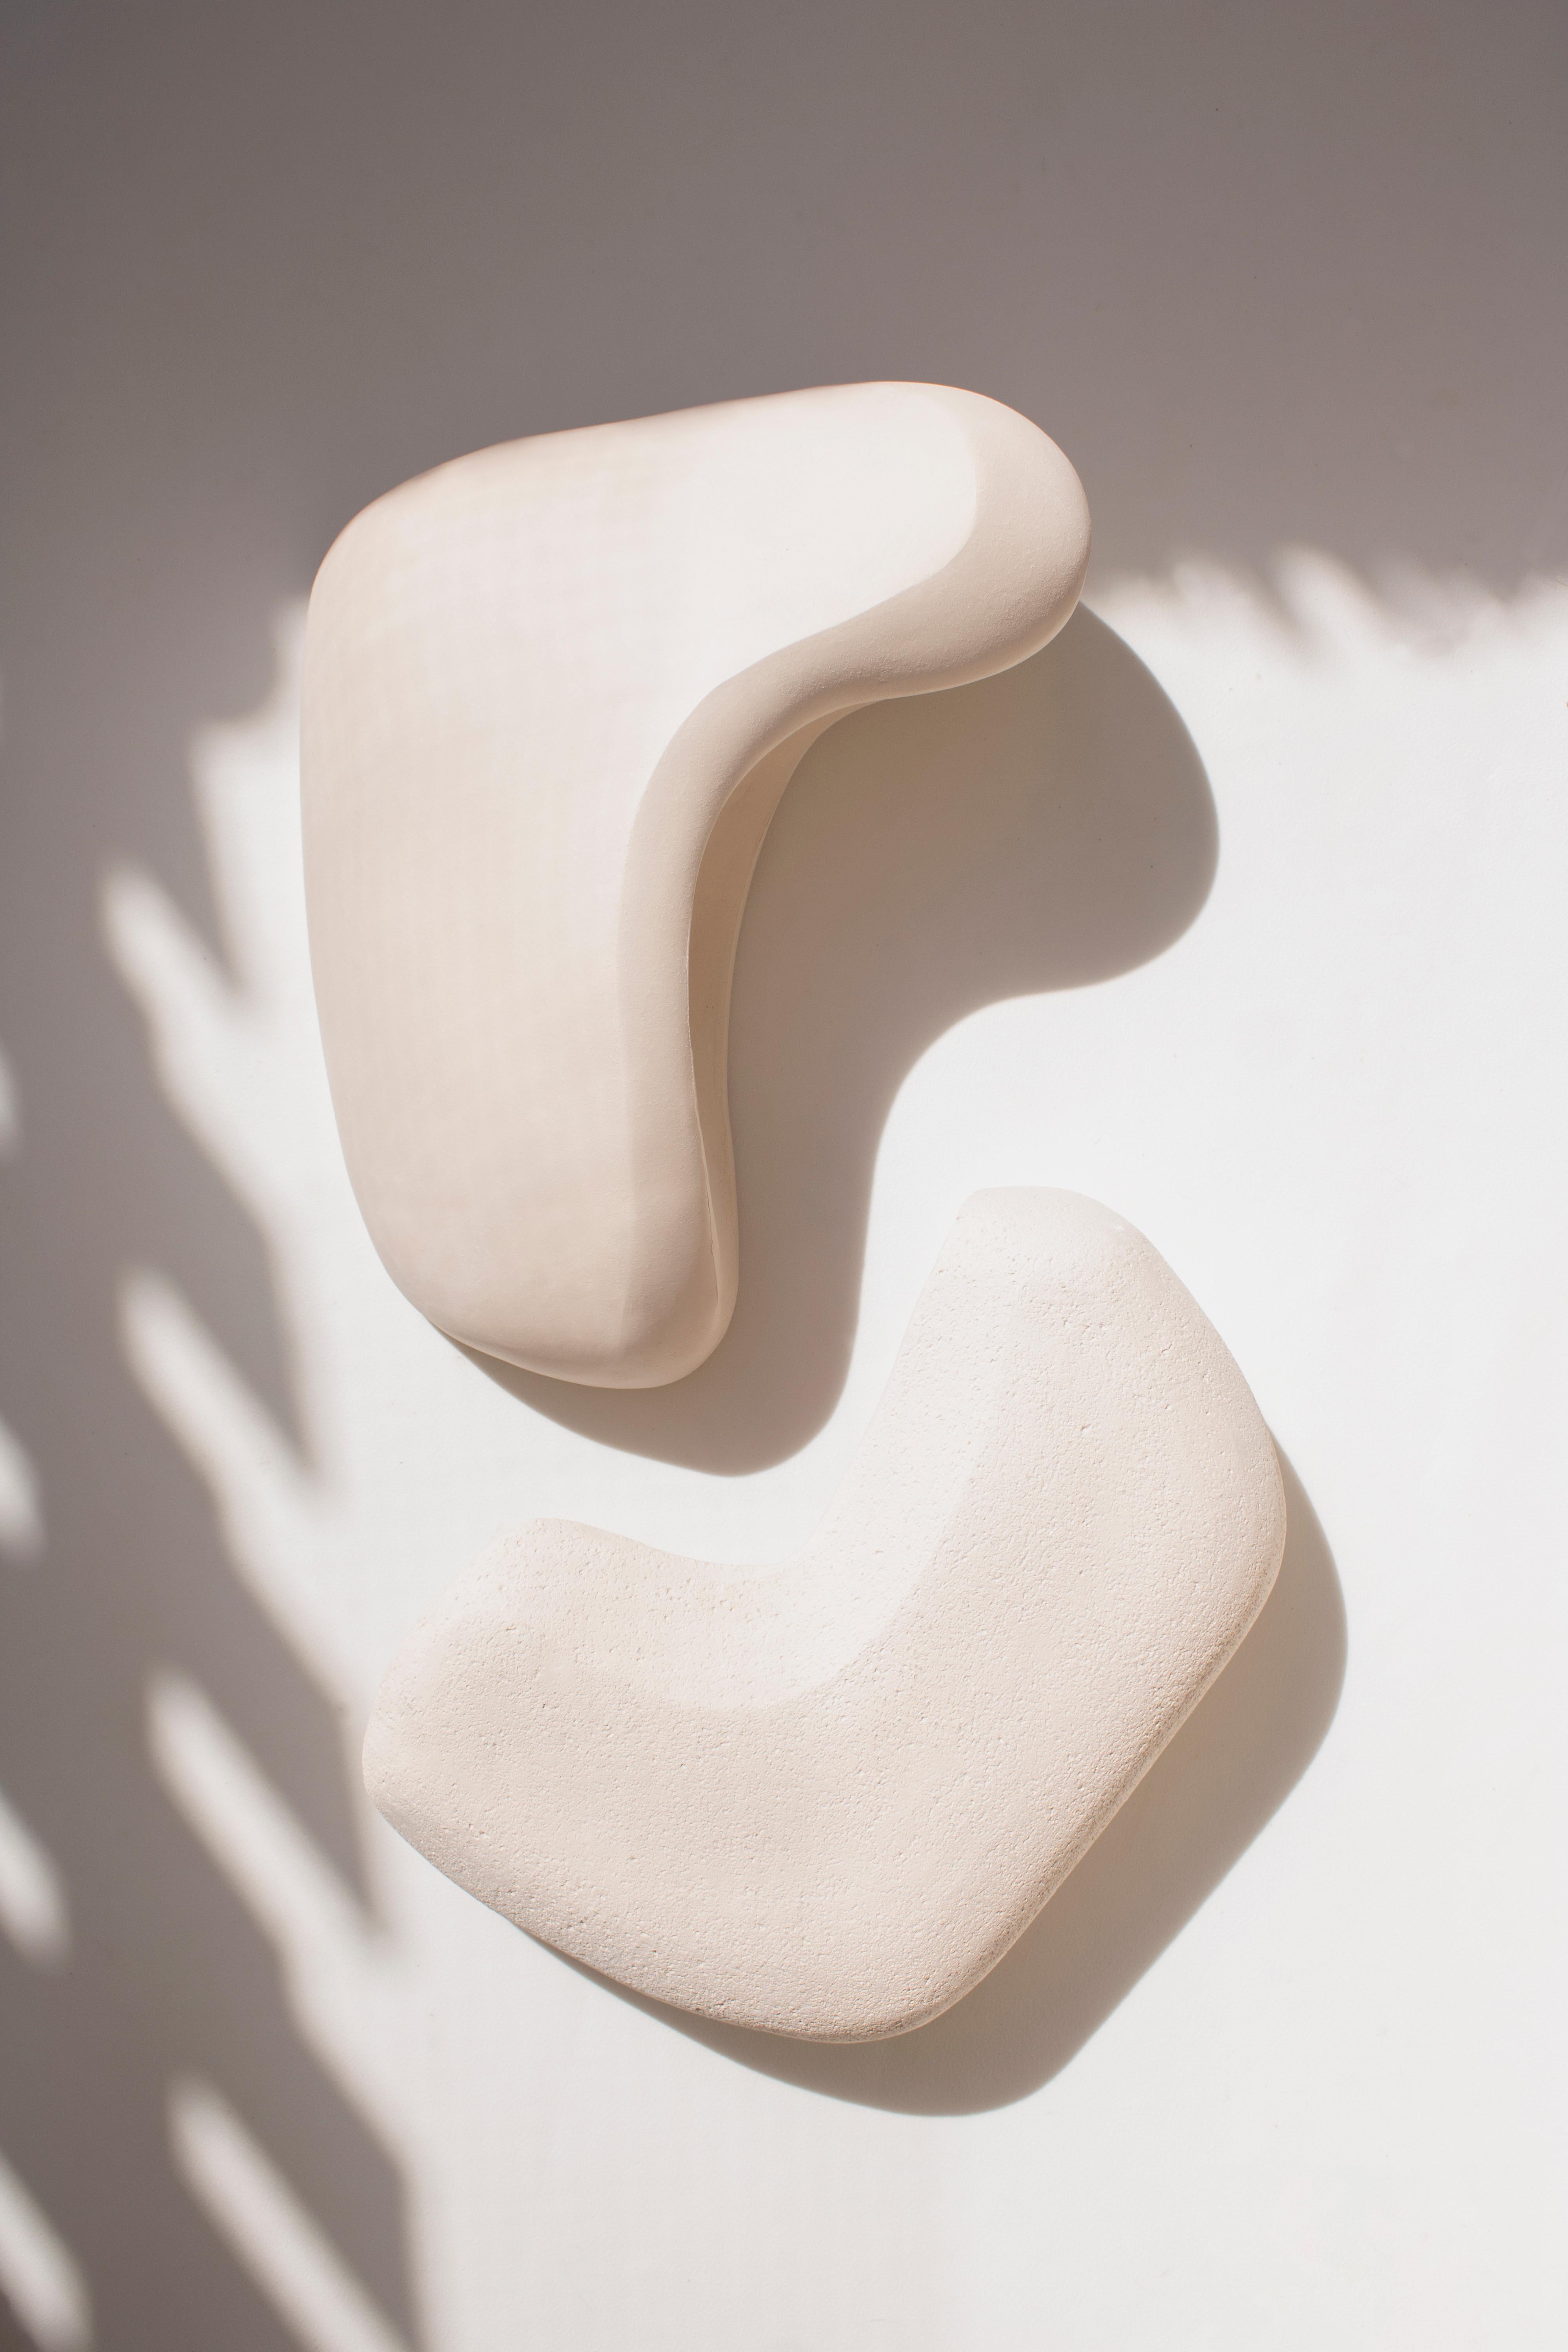 Form No.007 is a set of sculptural ceramic wall lamps from the Forms Collection. The piece is meticulously hand-built to explore the harmony in asymmetry. Its unique appeal lies in its abstract contours and organic shape that not only serve as an